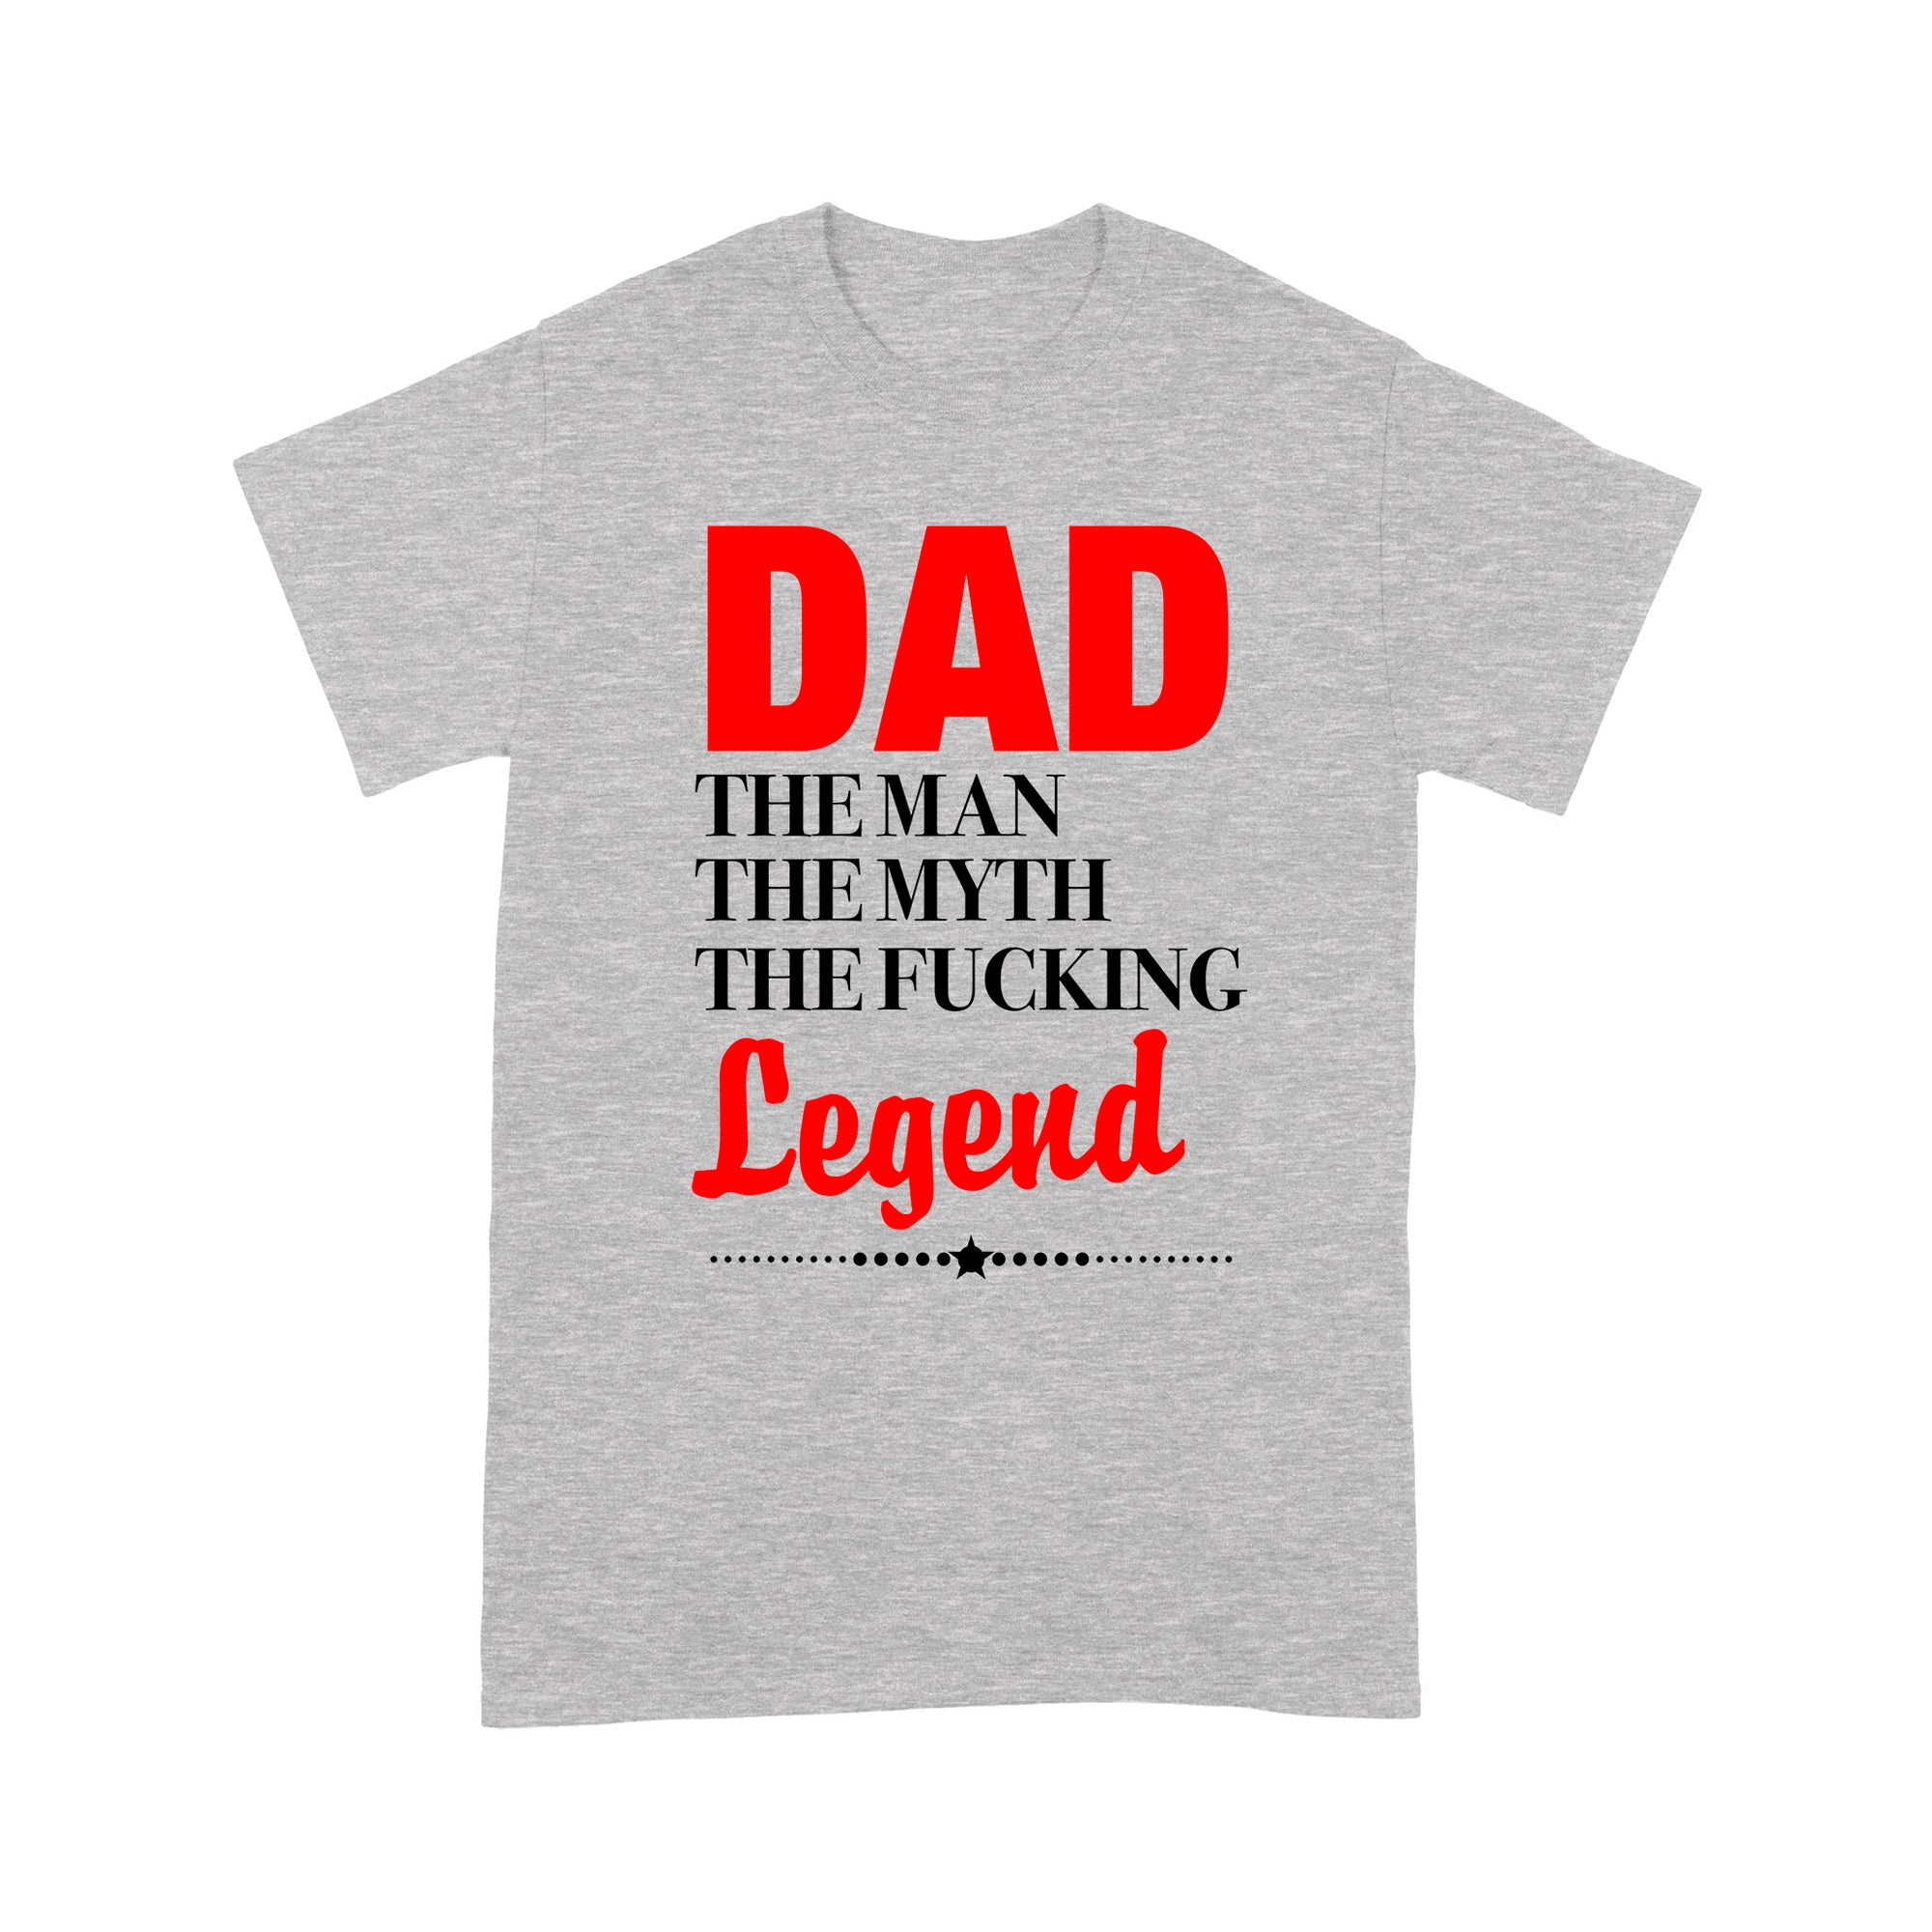 Gift Ideas for Dad Dad The Man The Myth The Fucking Legend (2) - Standard T-shirt